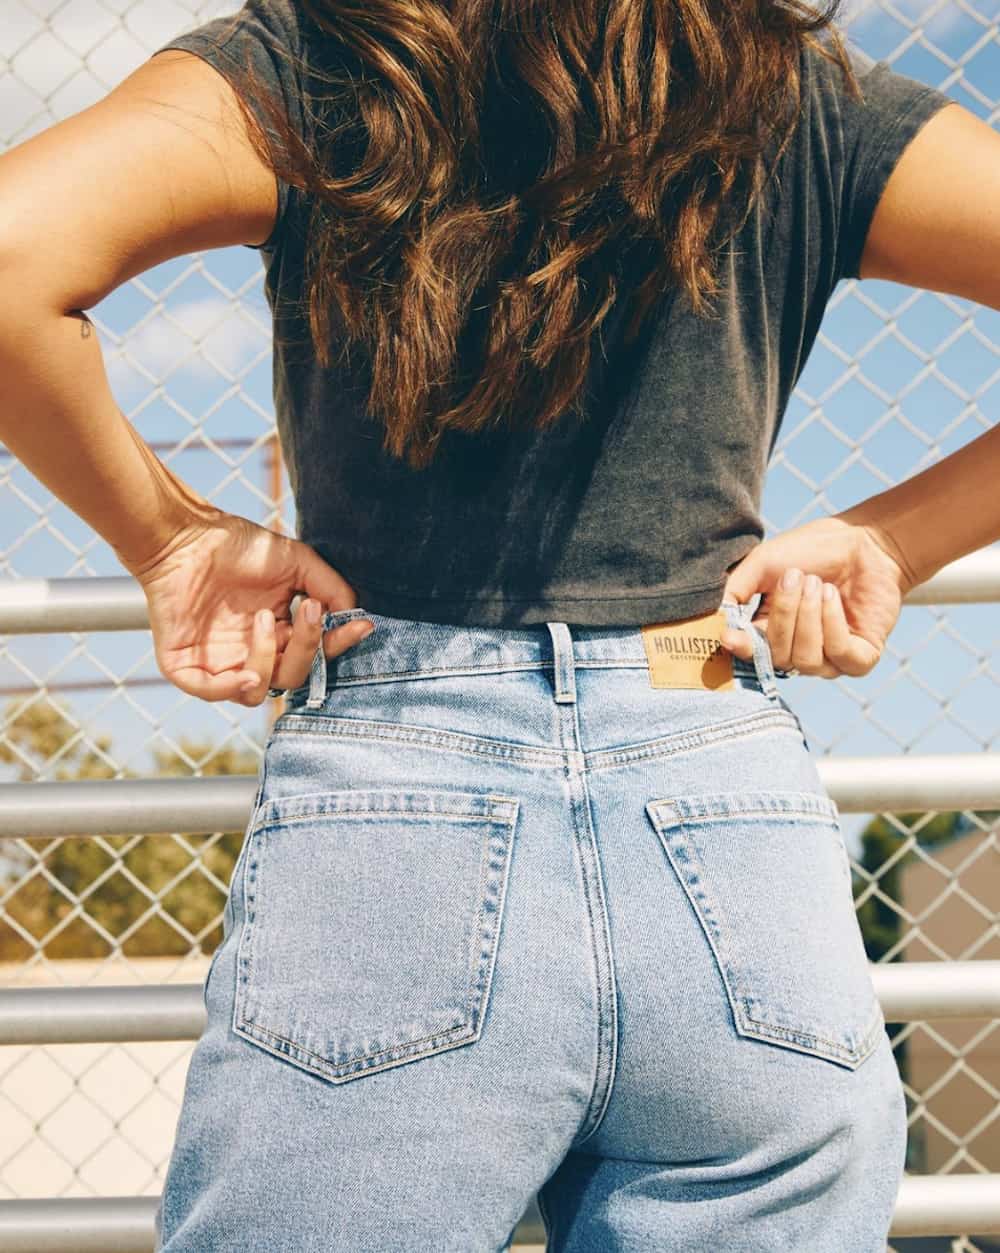 Image of a woman from the back pulling up her jeans belt loops wearing blue jeans and a black t-shirt